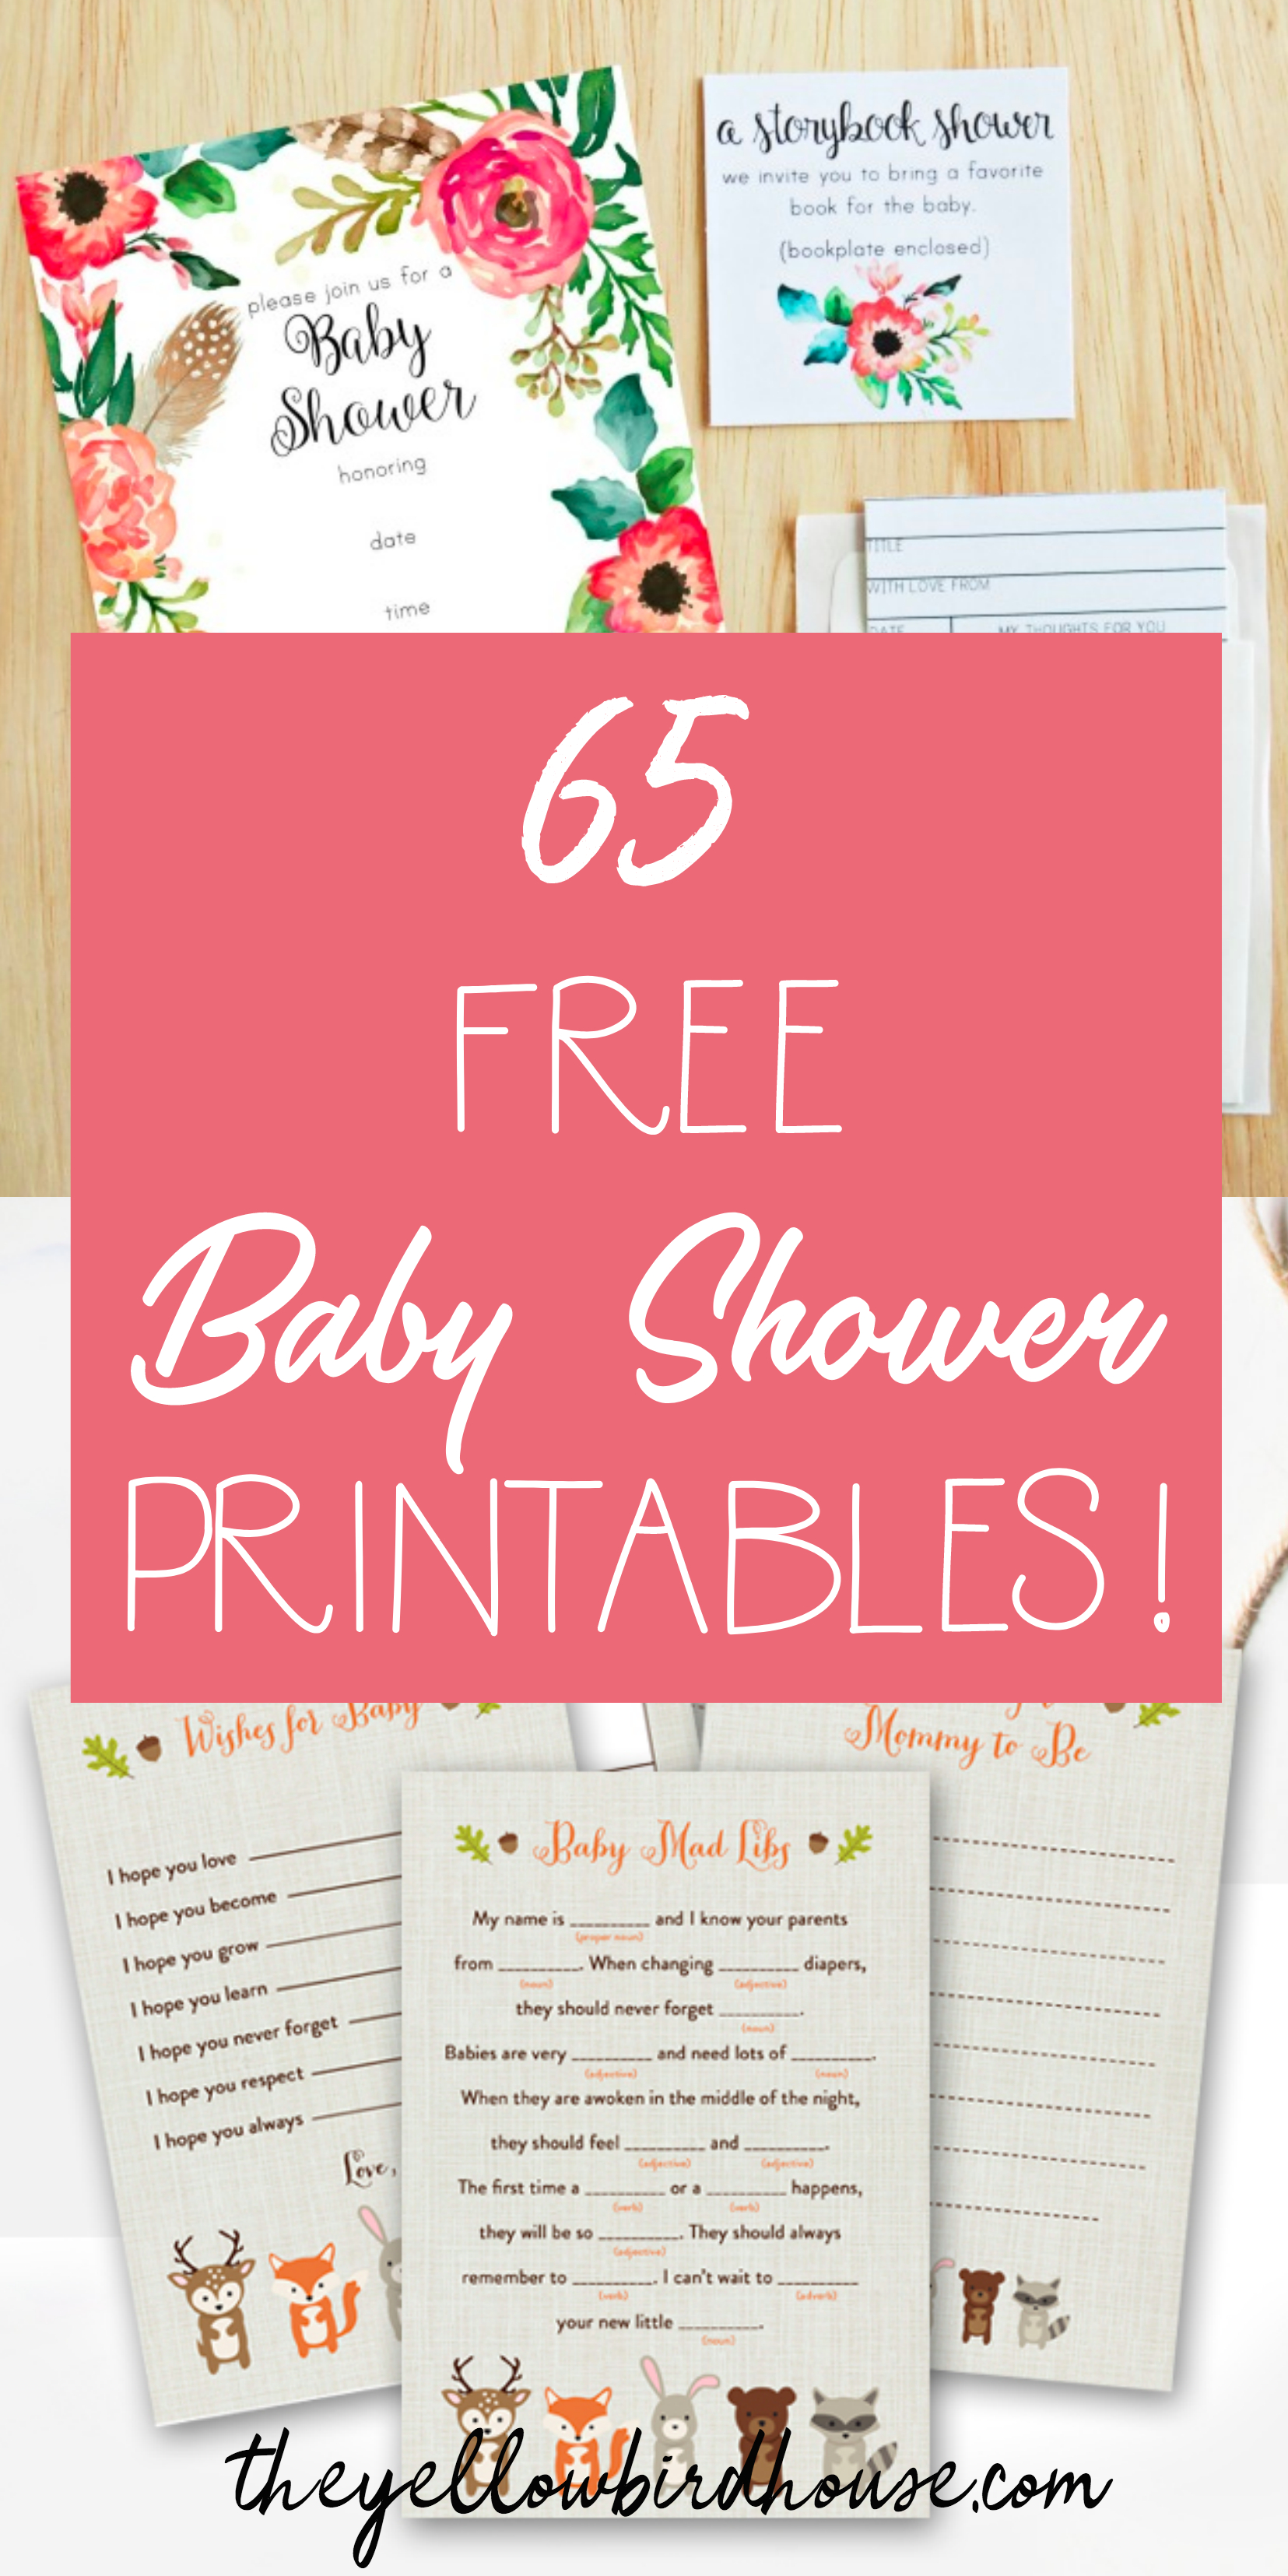 65 Free Baby Shower Printables For An Adorable Party - Baby Shower Bunting Free Printable